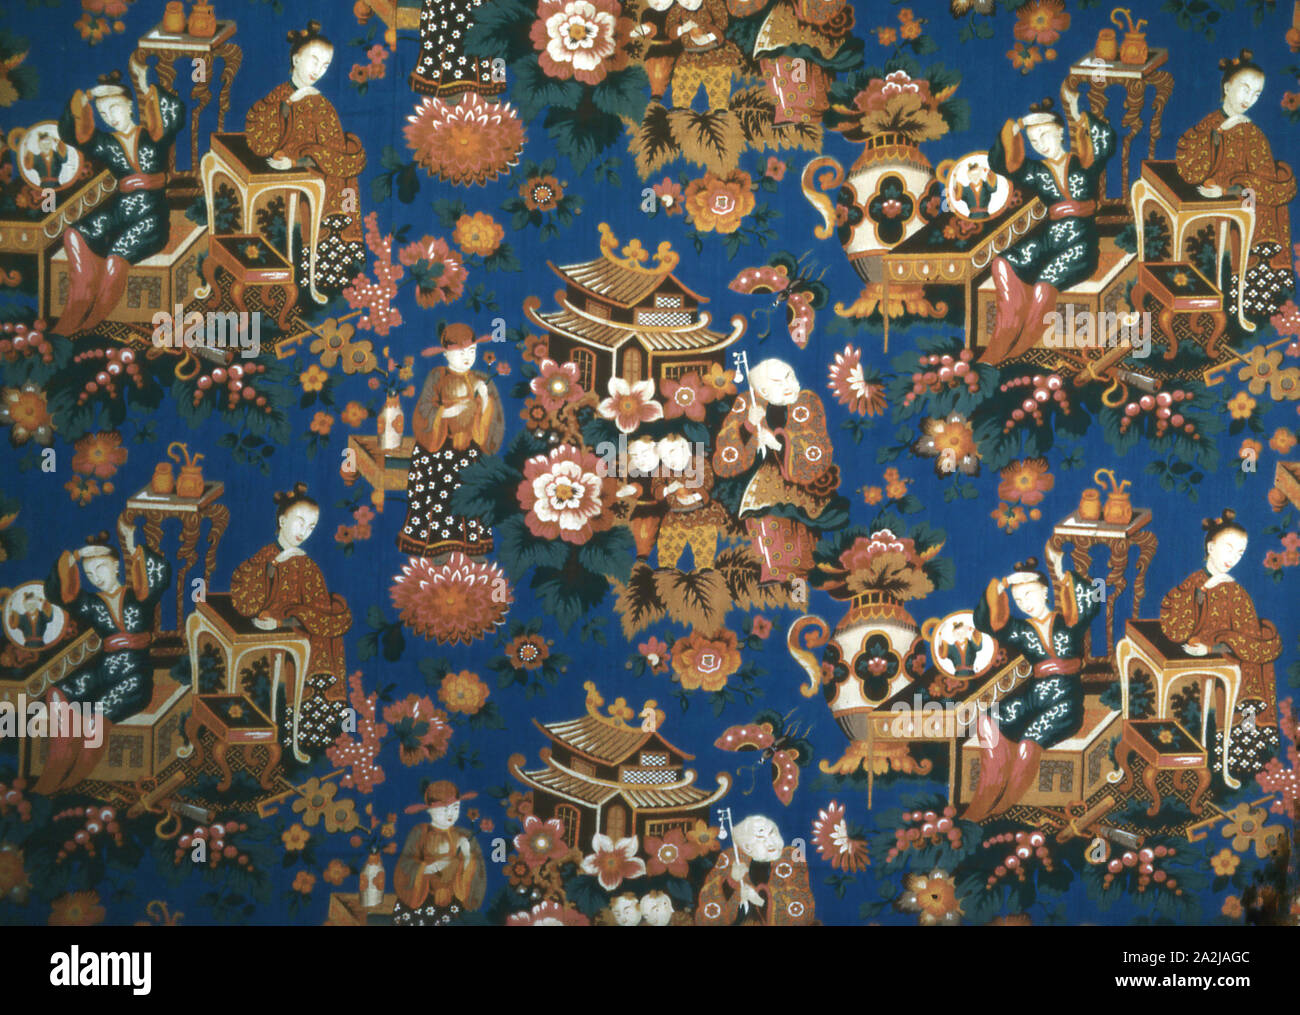 A Chinese Tea Party (Furnishing Fabric), c. 1854, Manufactured by Daniel Lee & Co. (English, active 1876-1900), England, Manchester, Manchester, Cotton, plain weave, roller printed, 229.9 x 221.4 cm (90 1/2 x 87 in Stock Photo